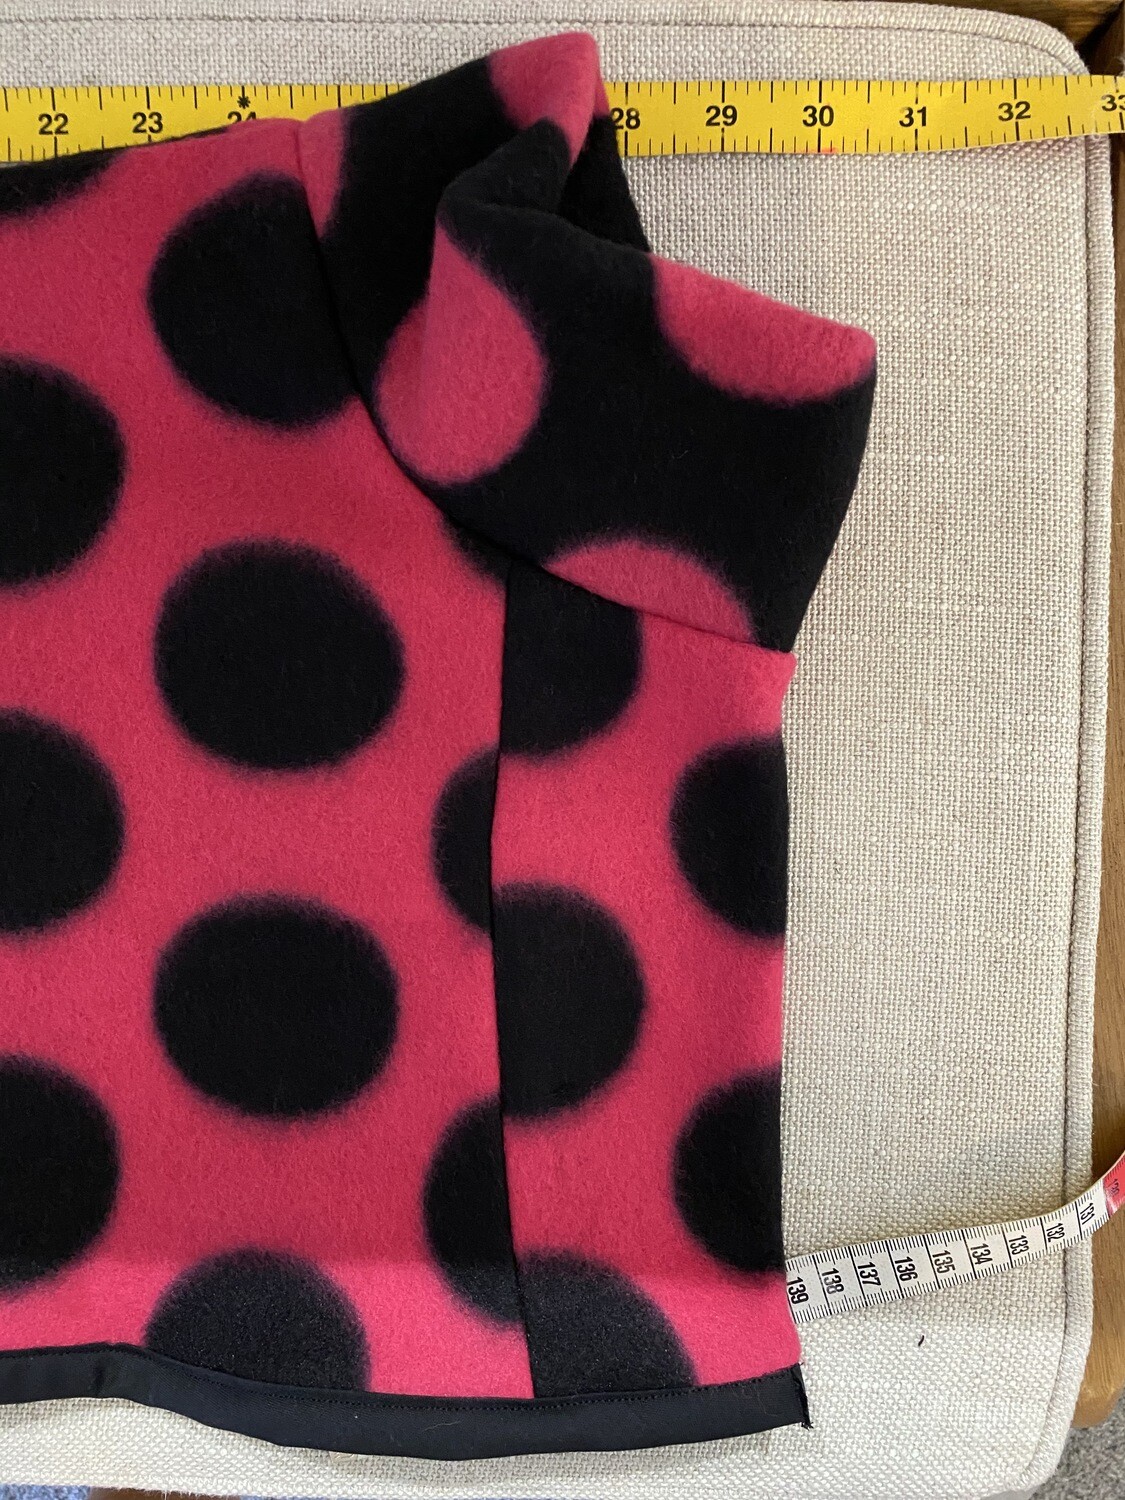 HANDMADE WITH LOVE - Large Whippet, Lurcher and Greyhound PJ's - Pink and Black Polka Dot